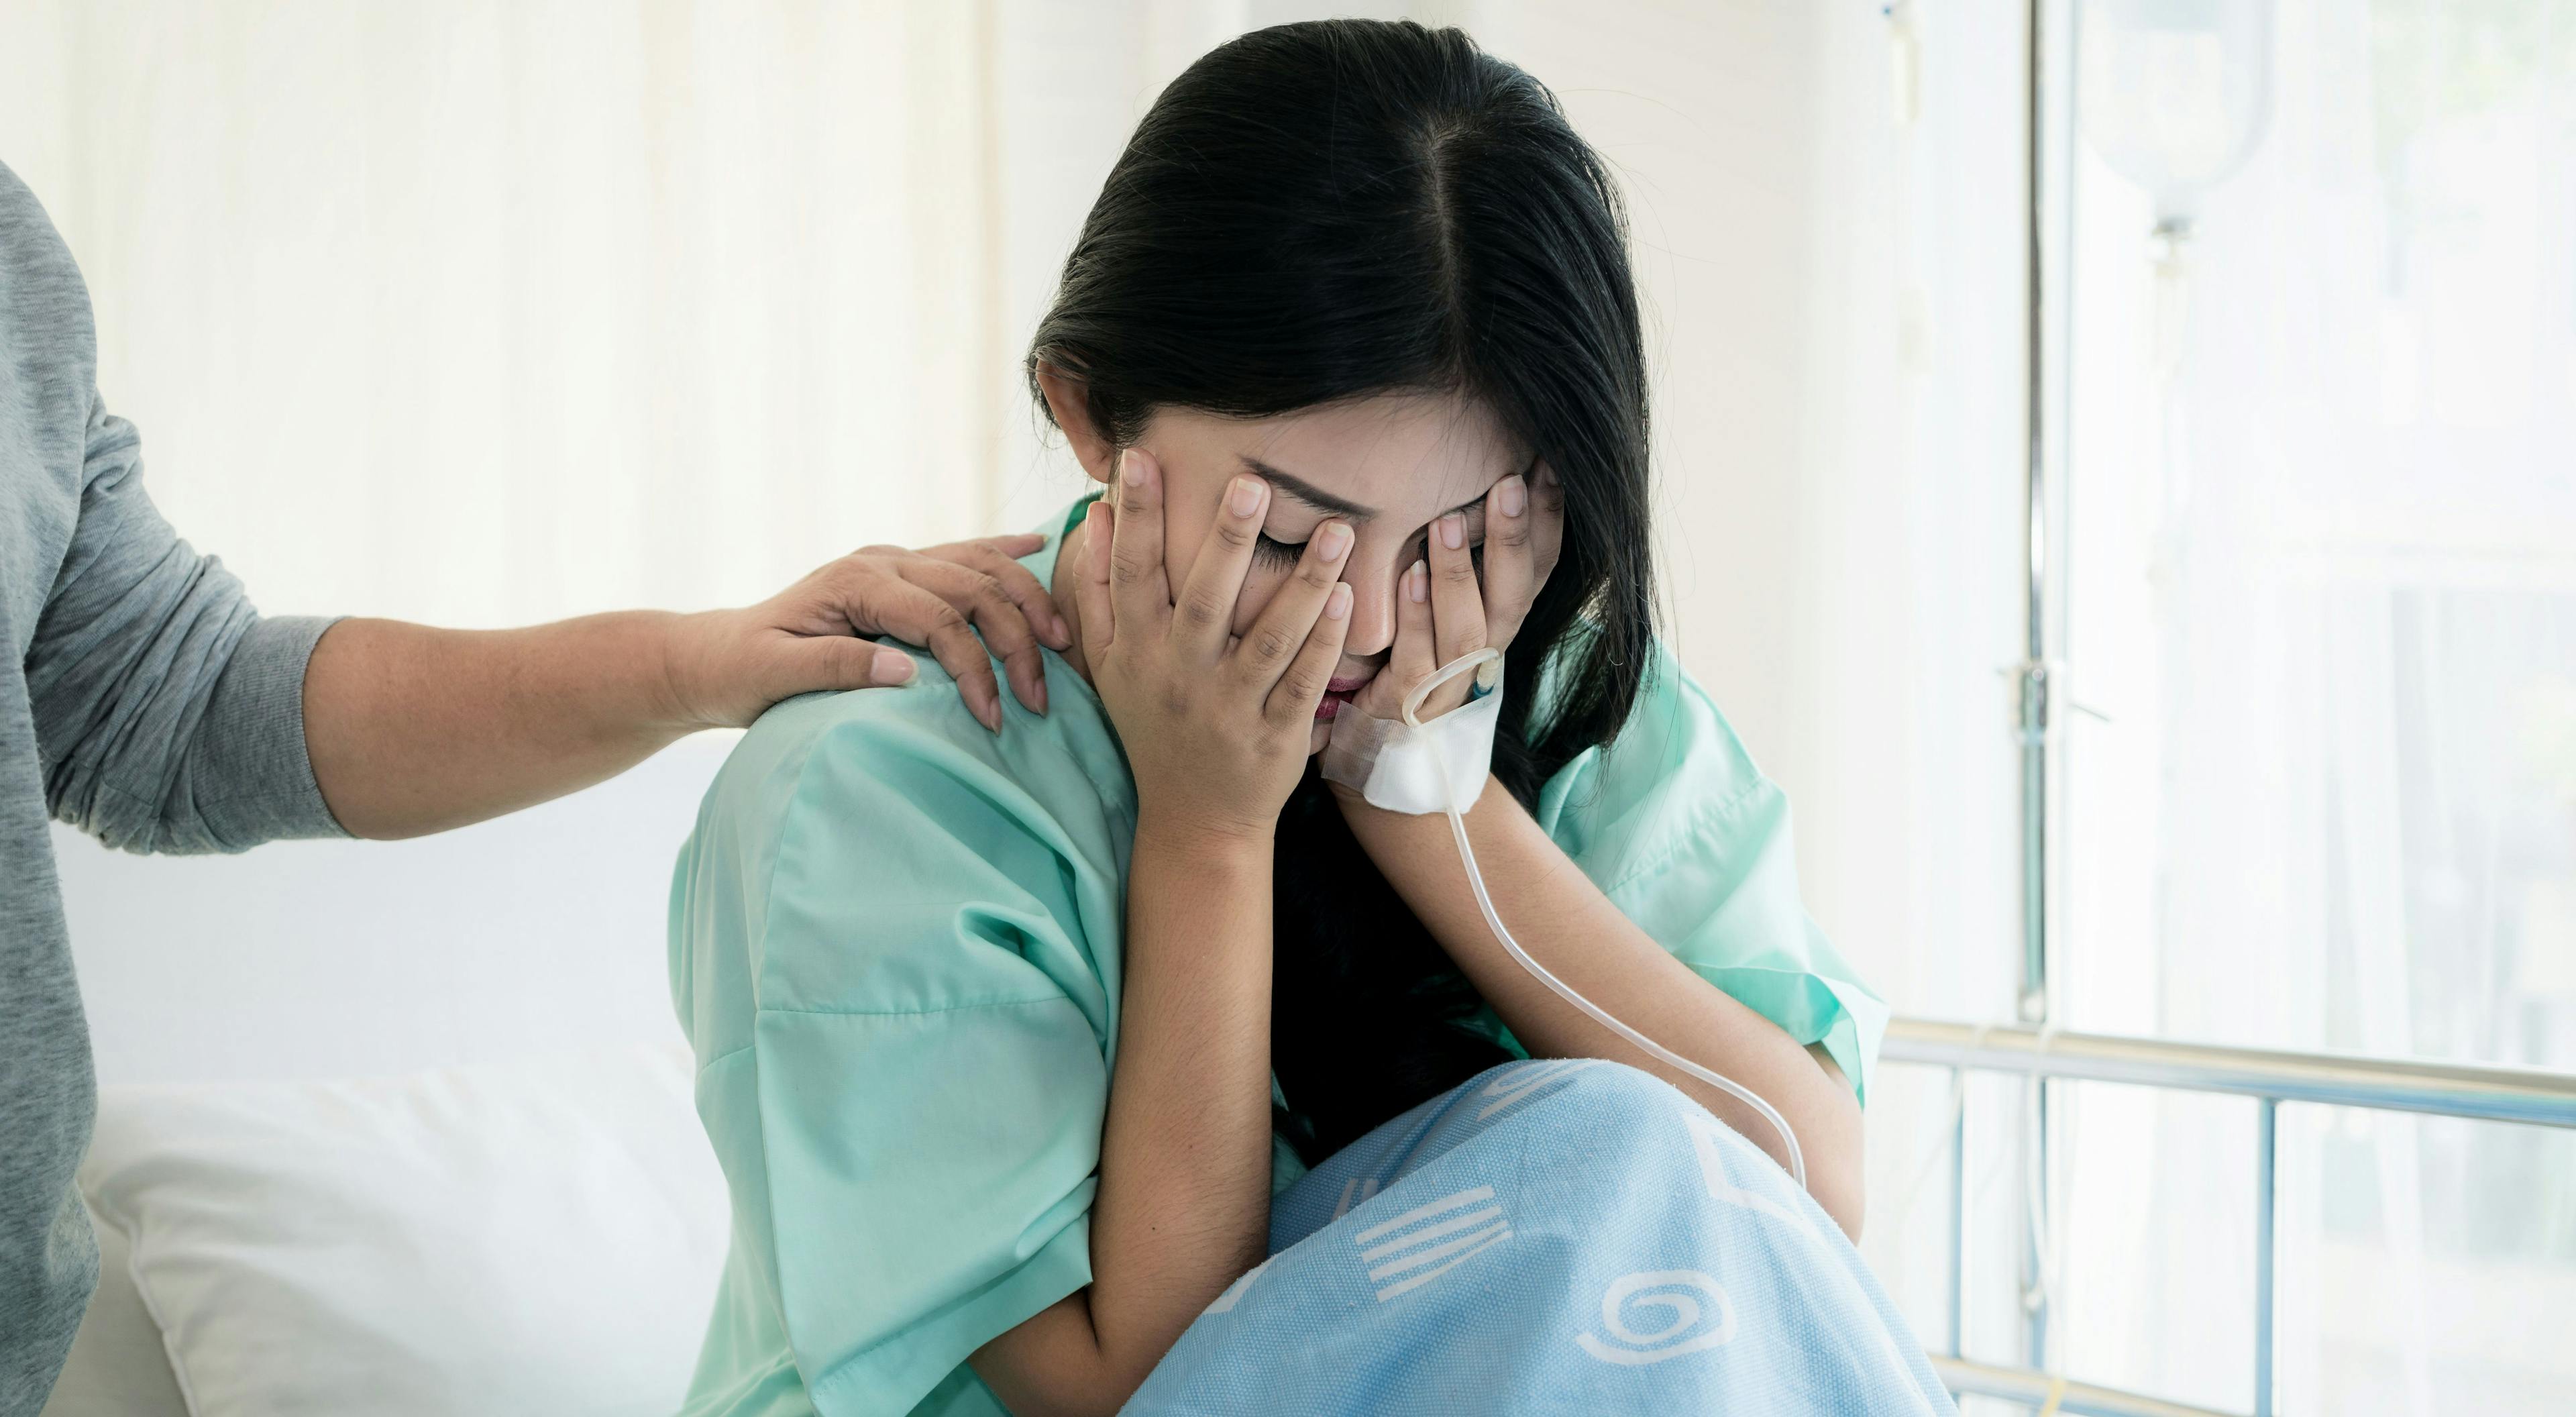 Recognizing the Signs of Caregiver Abuse